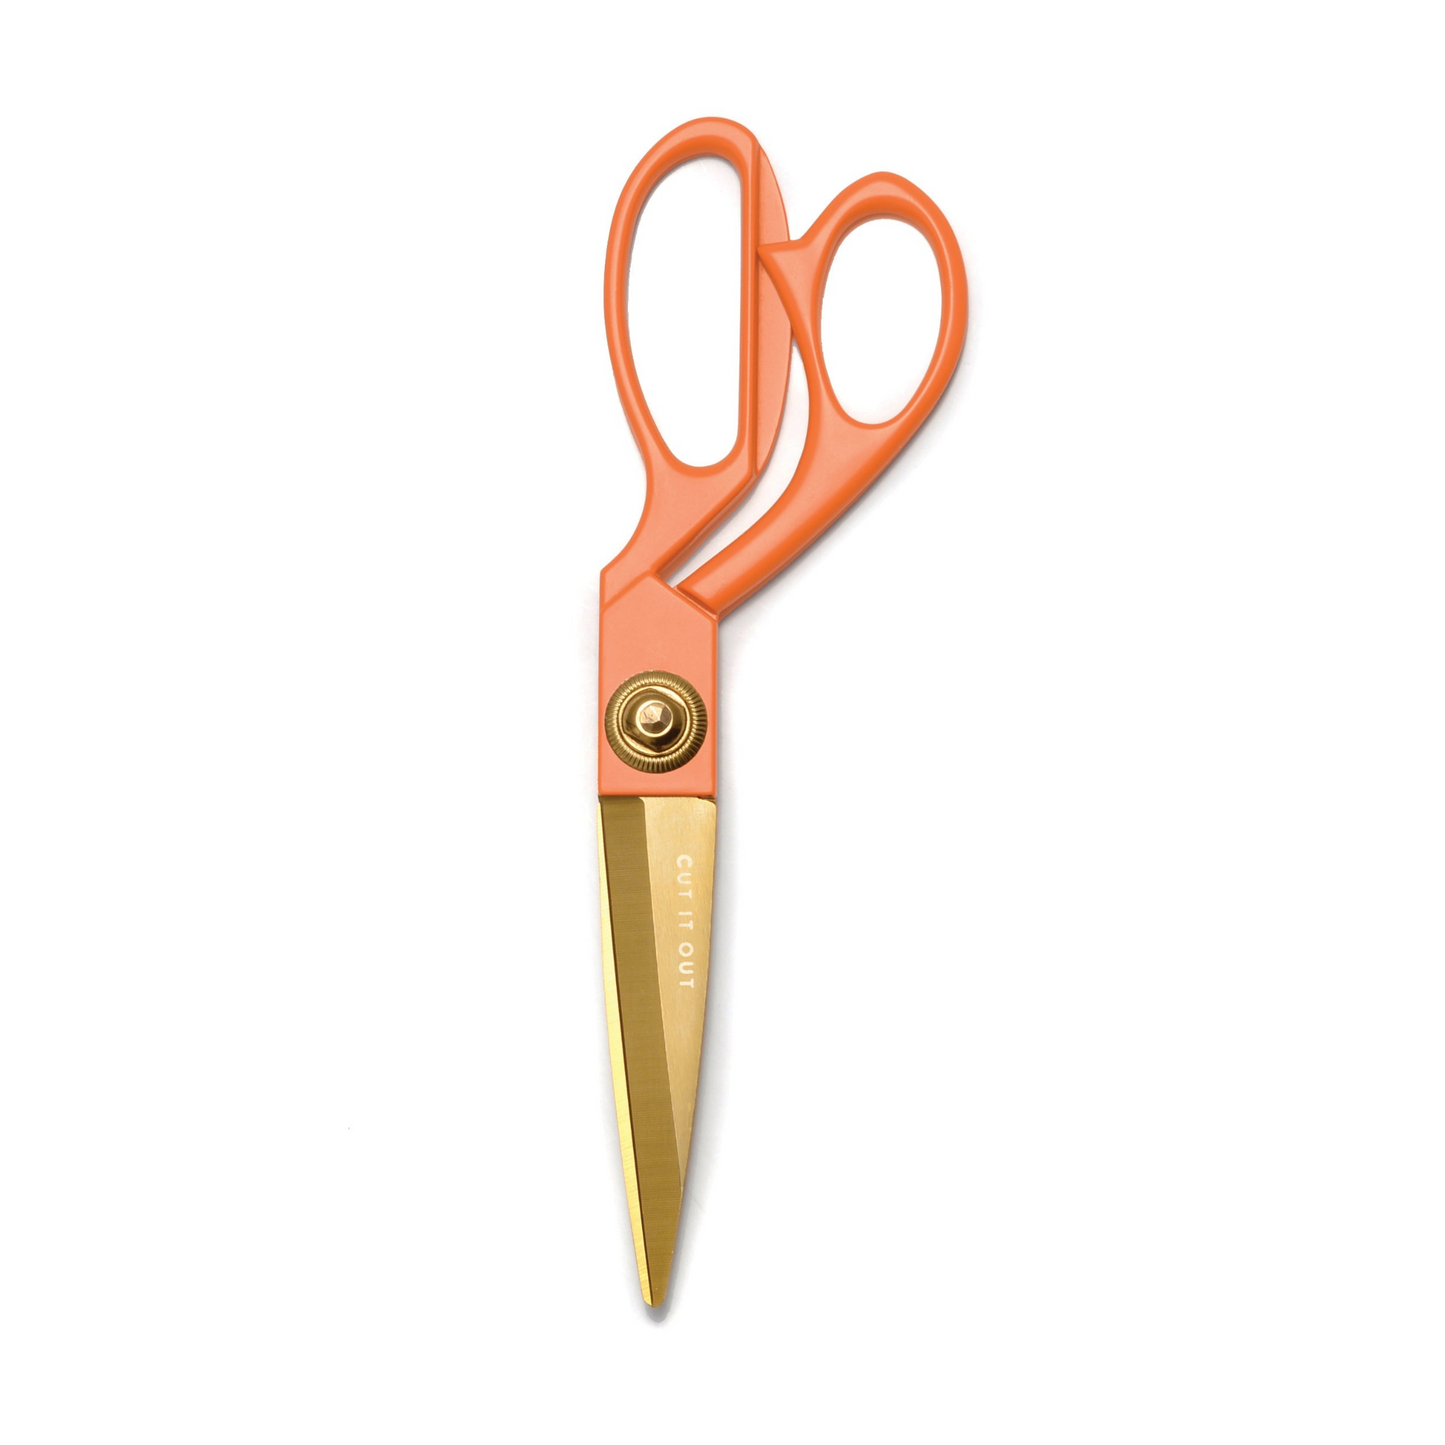 orange and gold scissors on a white background.